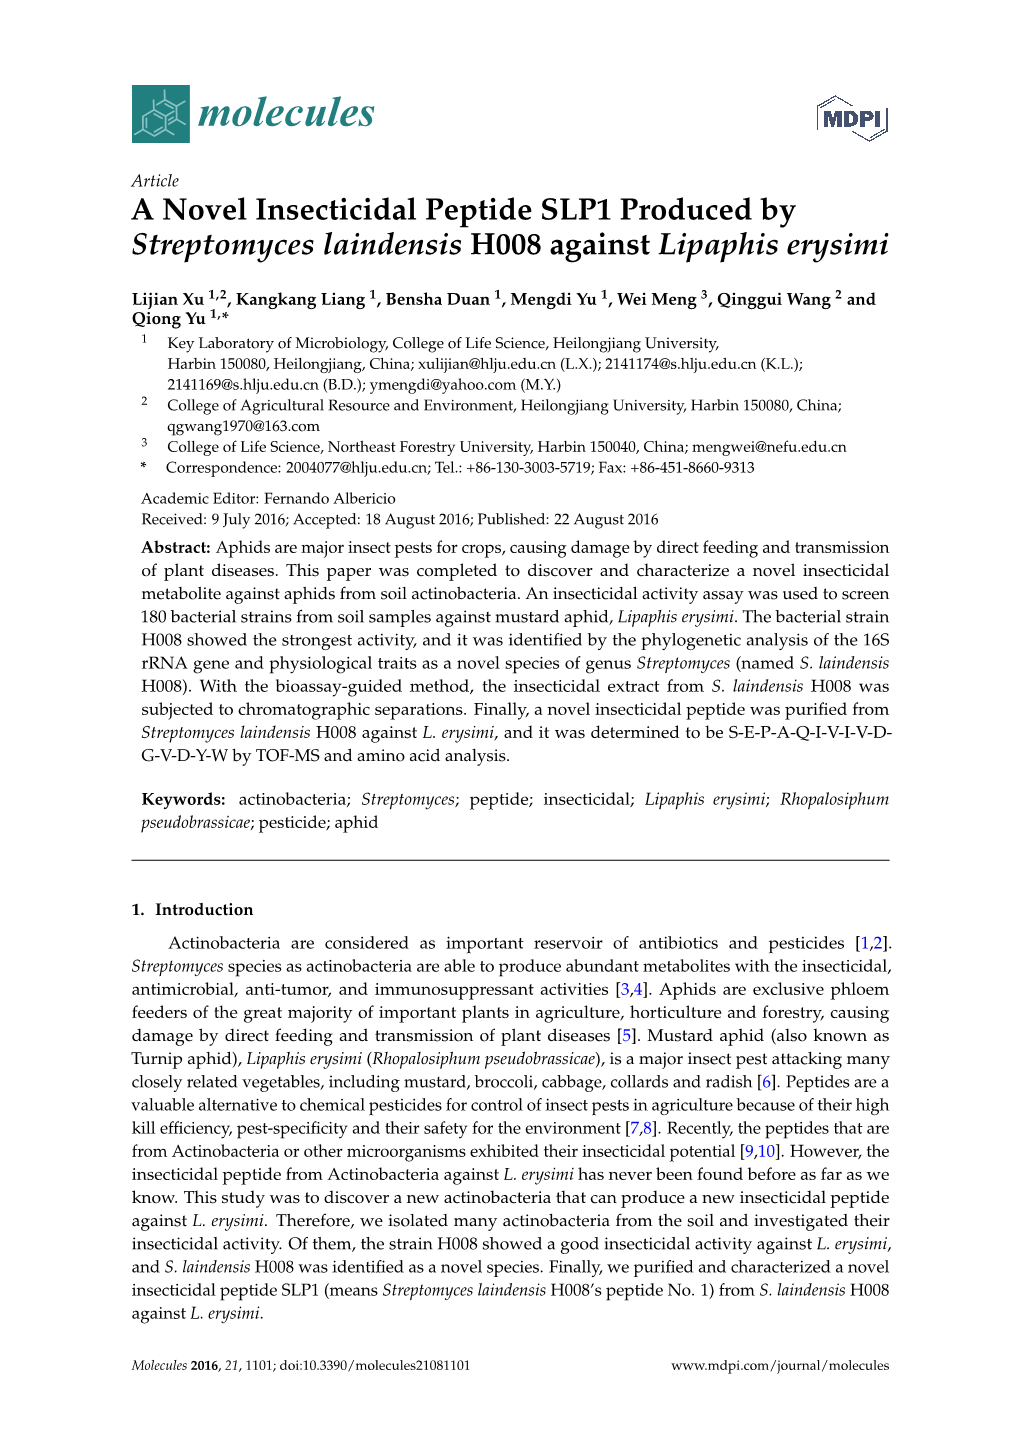 A Novel Insecticidal Peptide SLP1 Produced by Streptomyces Laindensis H008 Against Lipaphis Erysimi